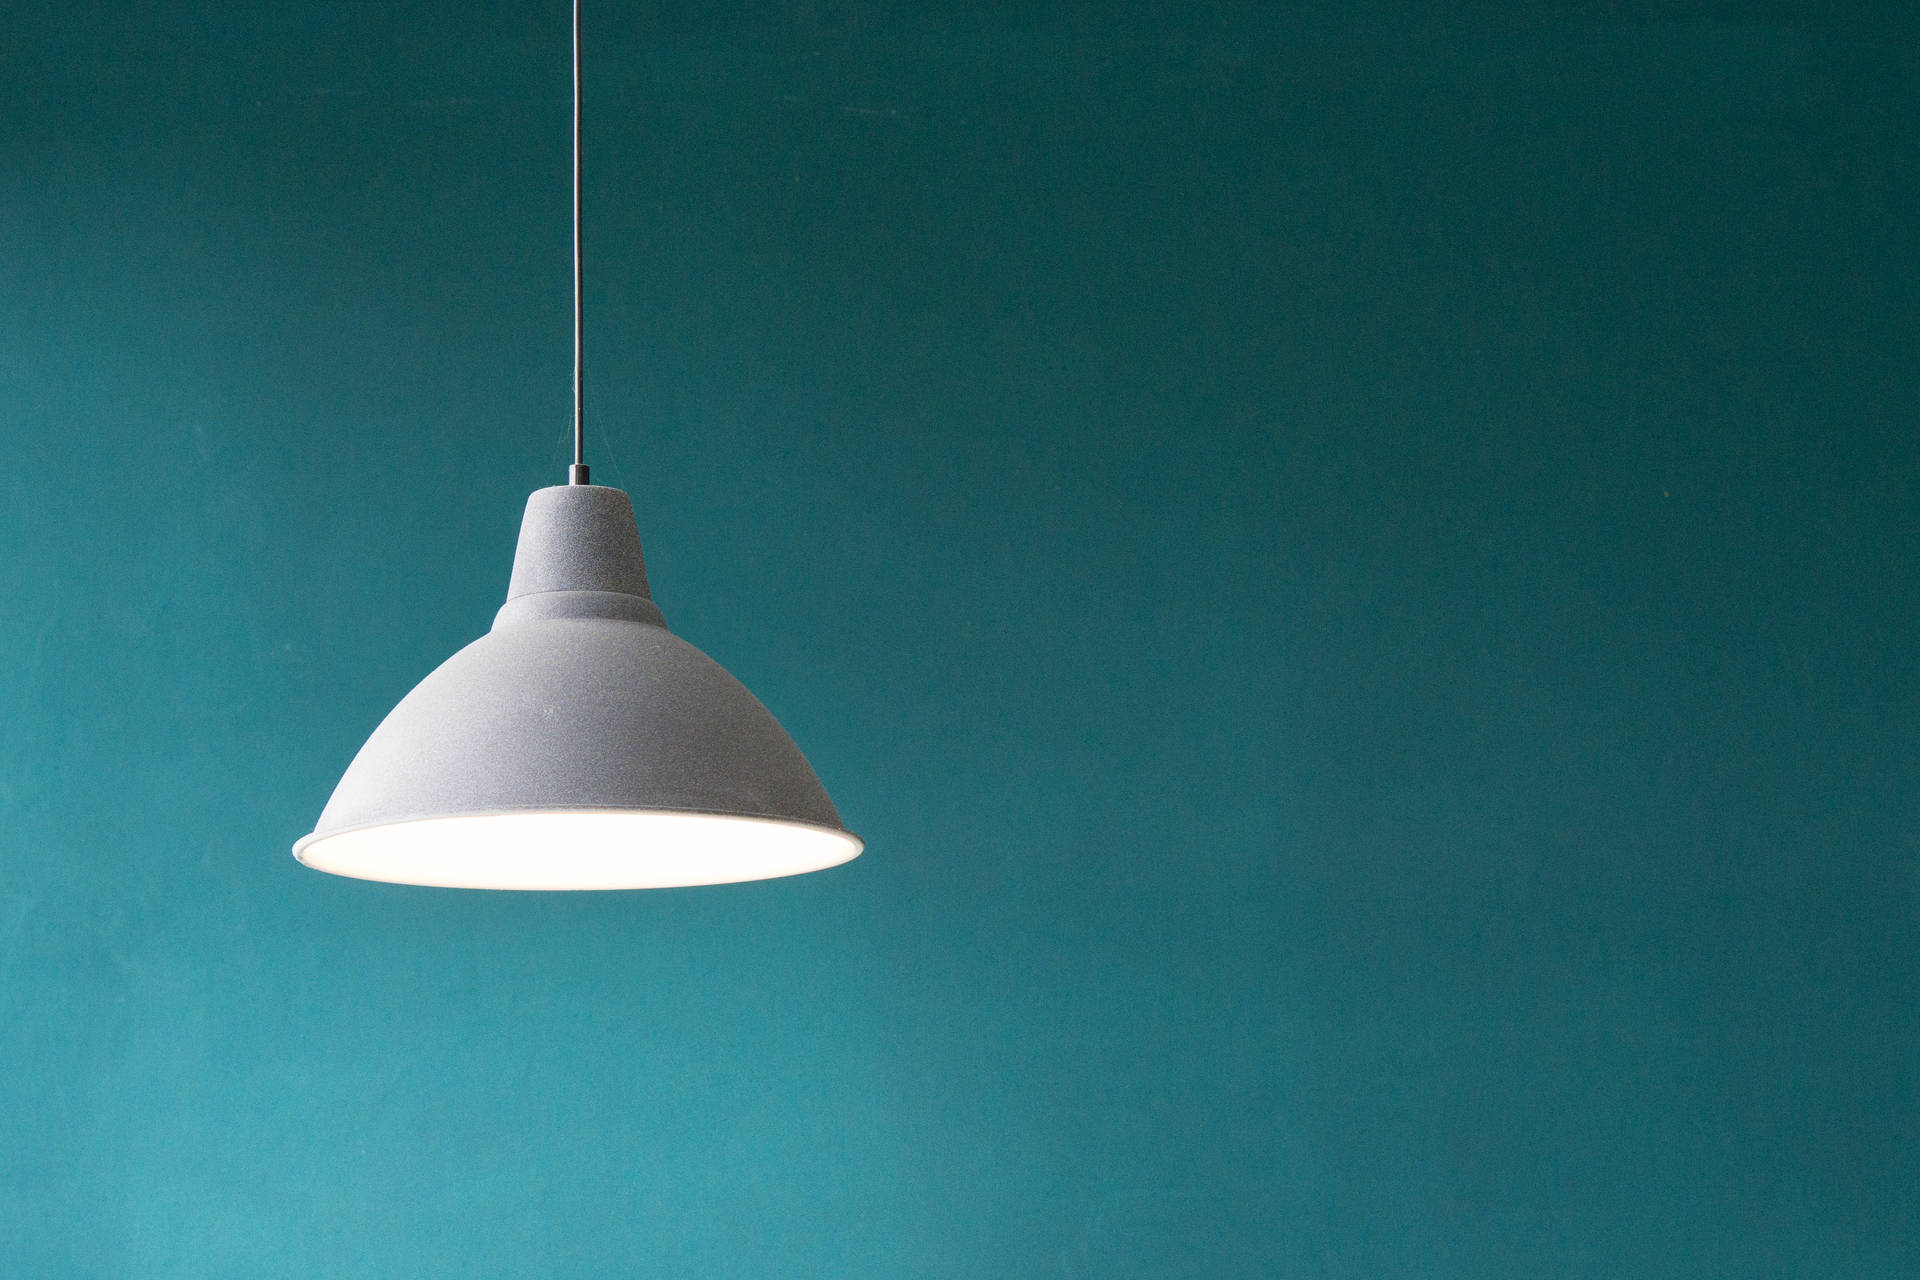 "The Charm of Simplicity: Teal Wall with Hanging Lamp" Wallpaper